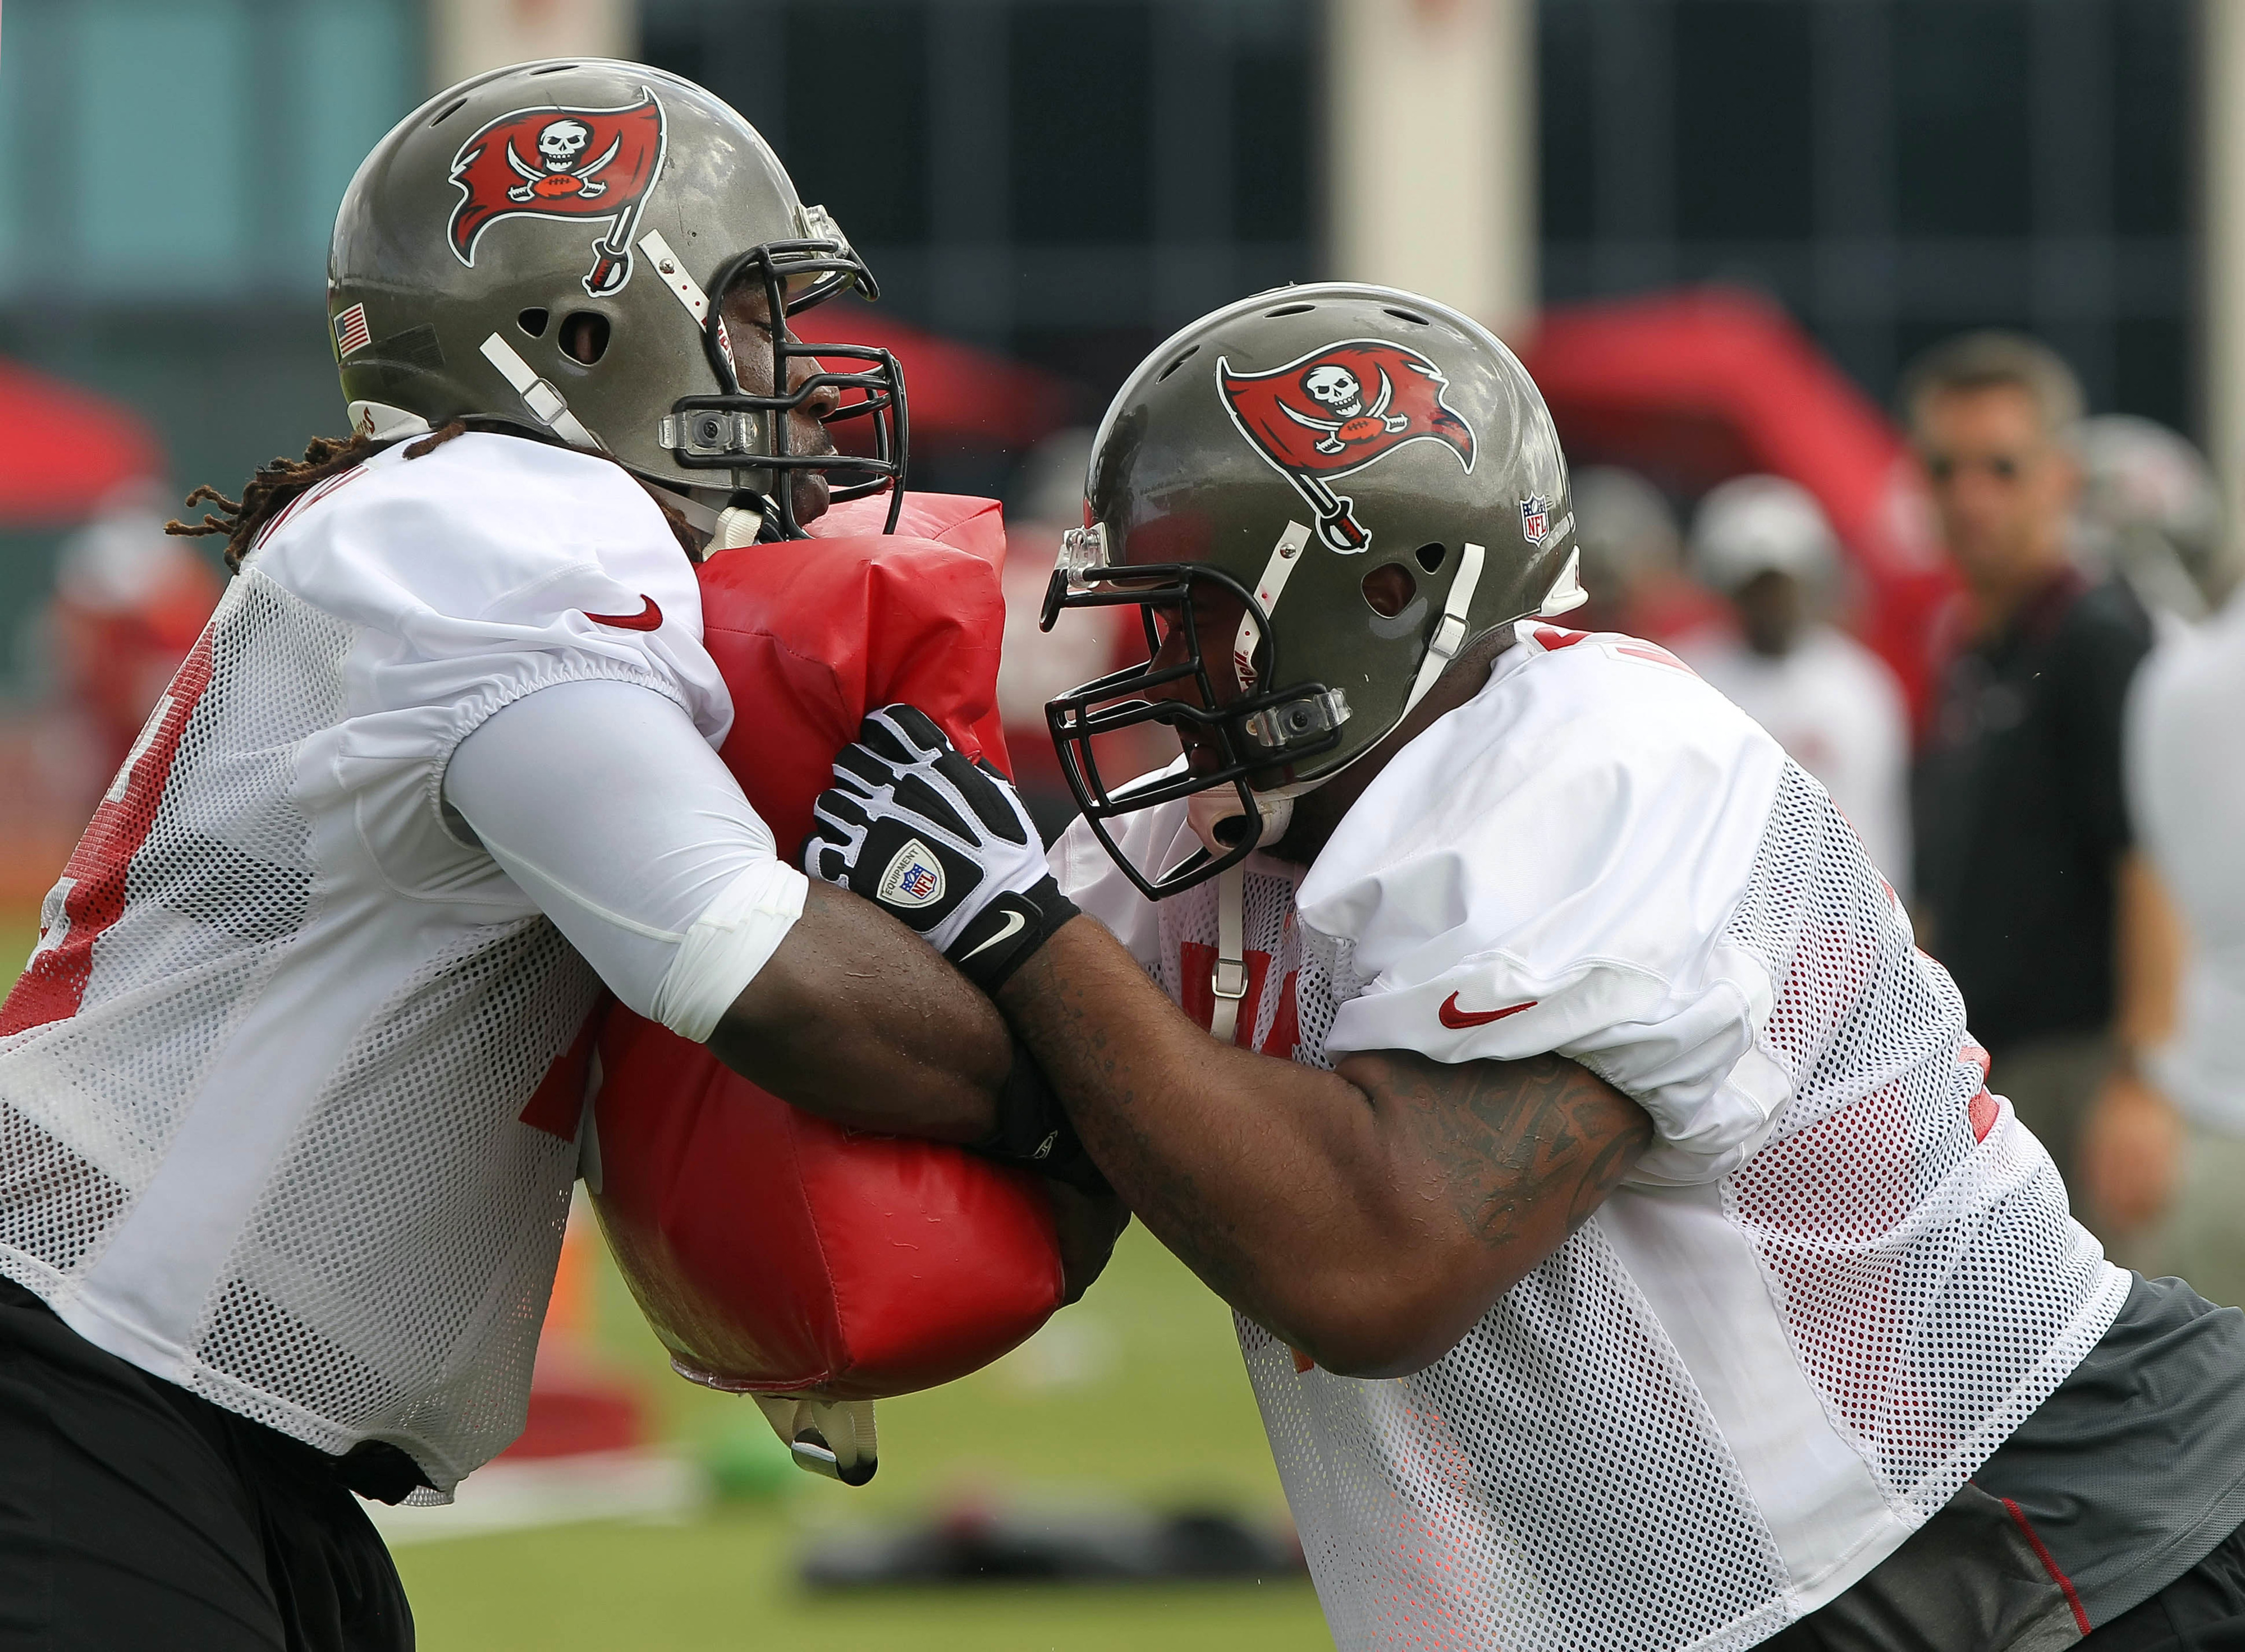 July 28, 2012; Tampa, FL, USA; Tampa Bay Buccaneers offensive guard Carl Nicks (77) (right) and offensive tackle Jamon Meredith (79) (left) practice drills during training camp at One Buc Place. Mandatory Credit: Kim Klement-US PRESSWIRE